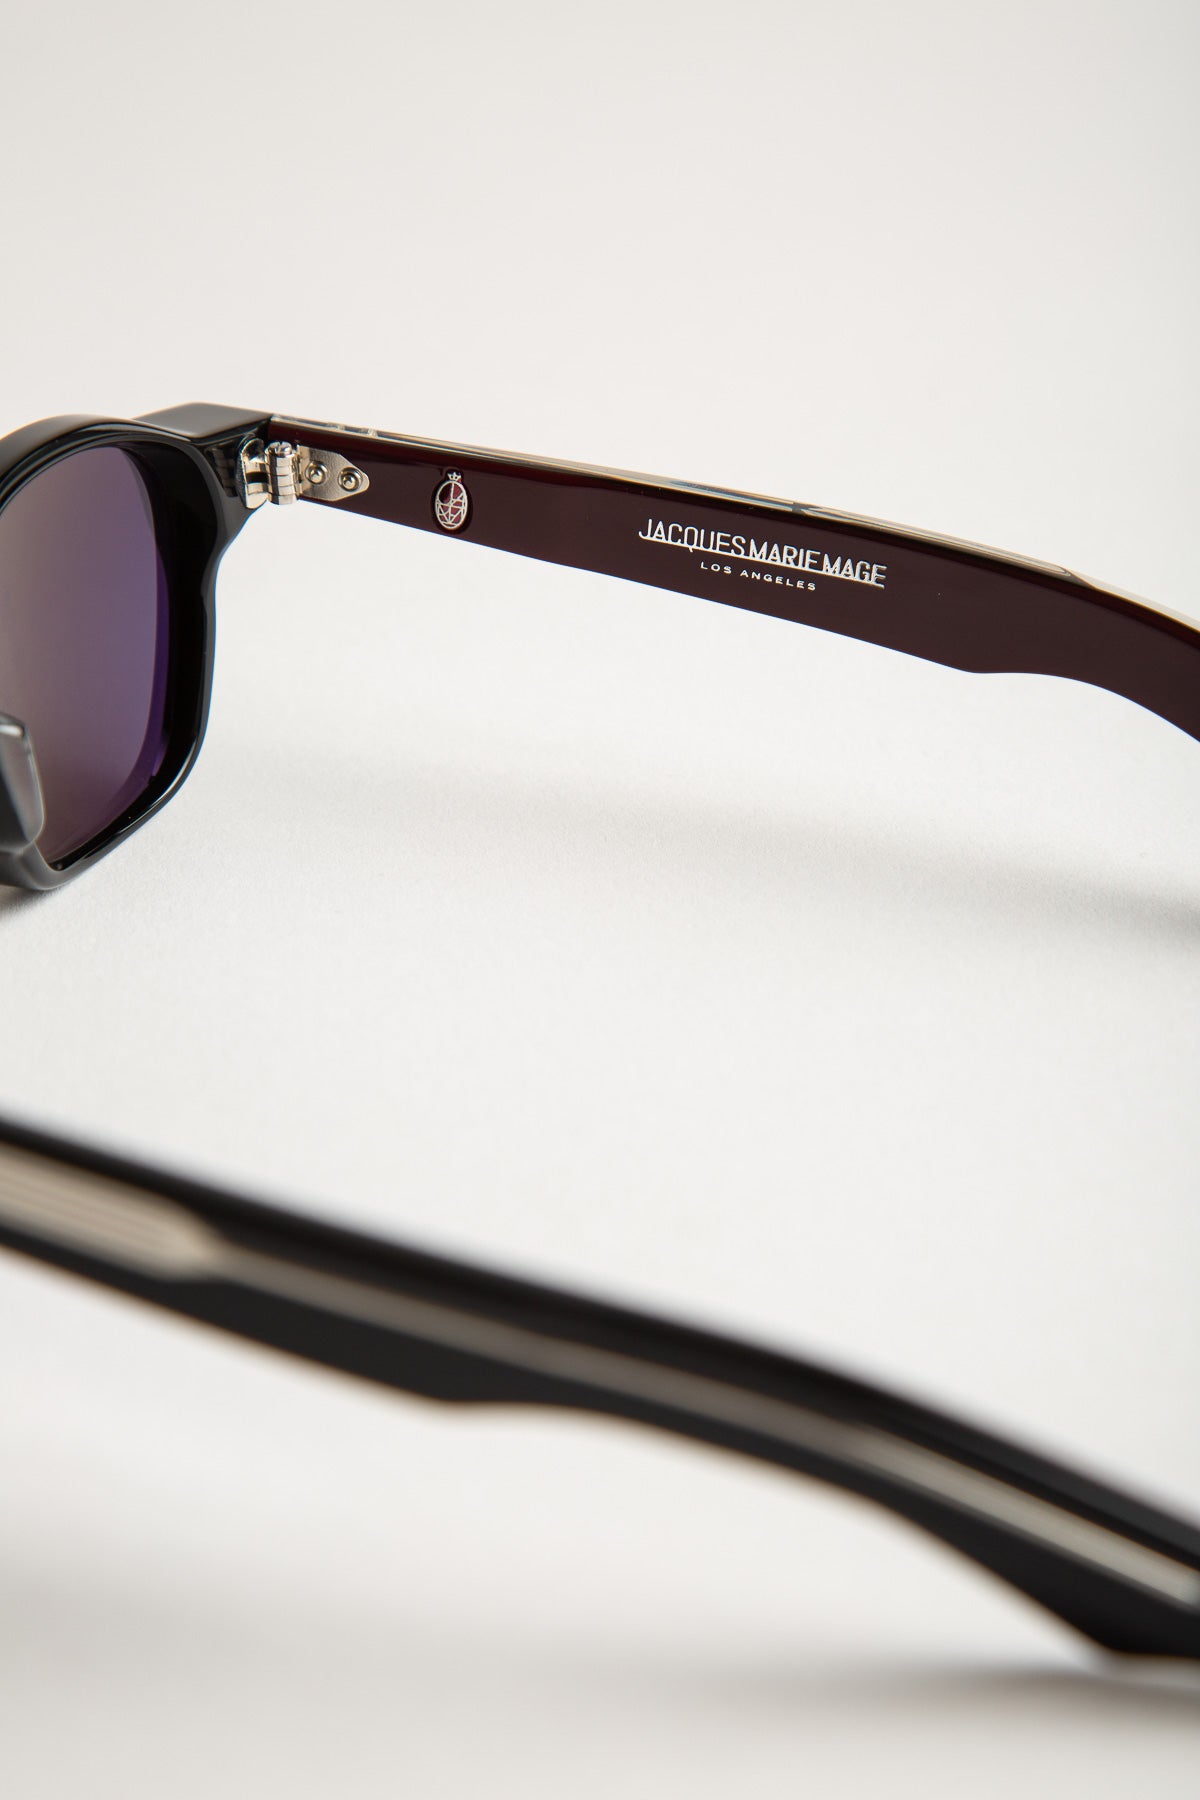 JACQUES MARIE MAGE | ZEPHIRIN SUNGLASSES